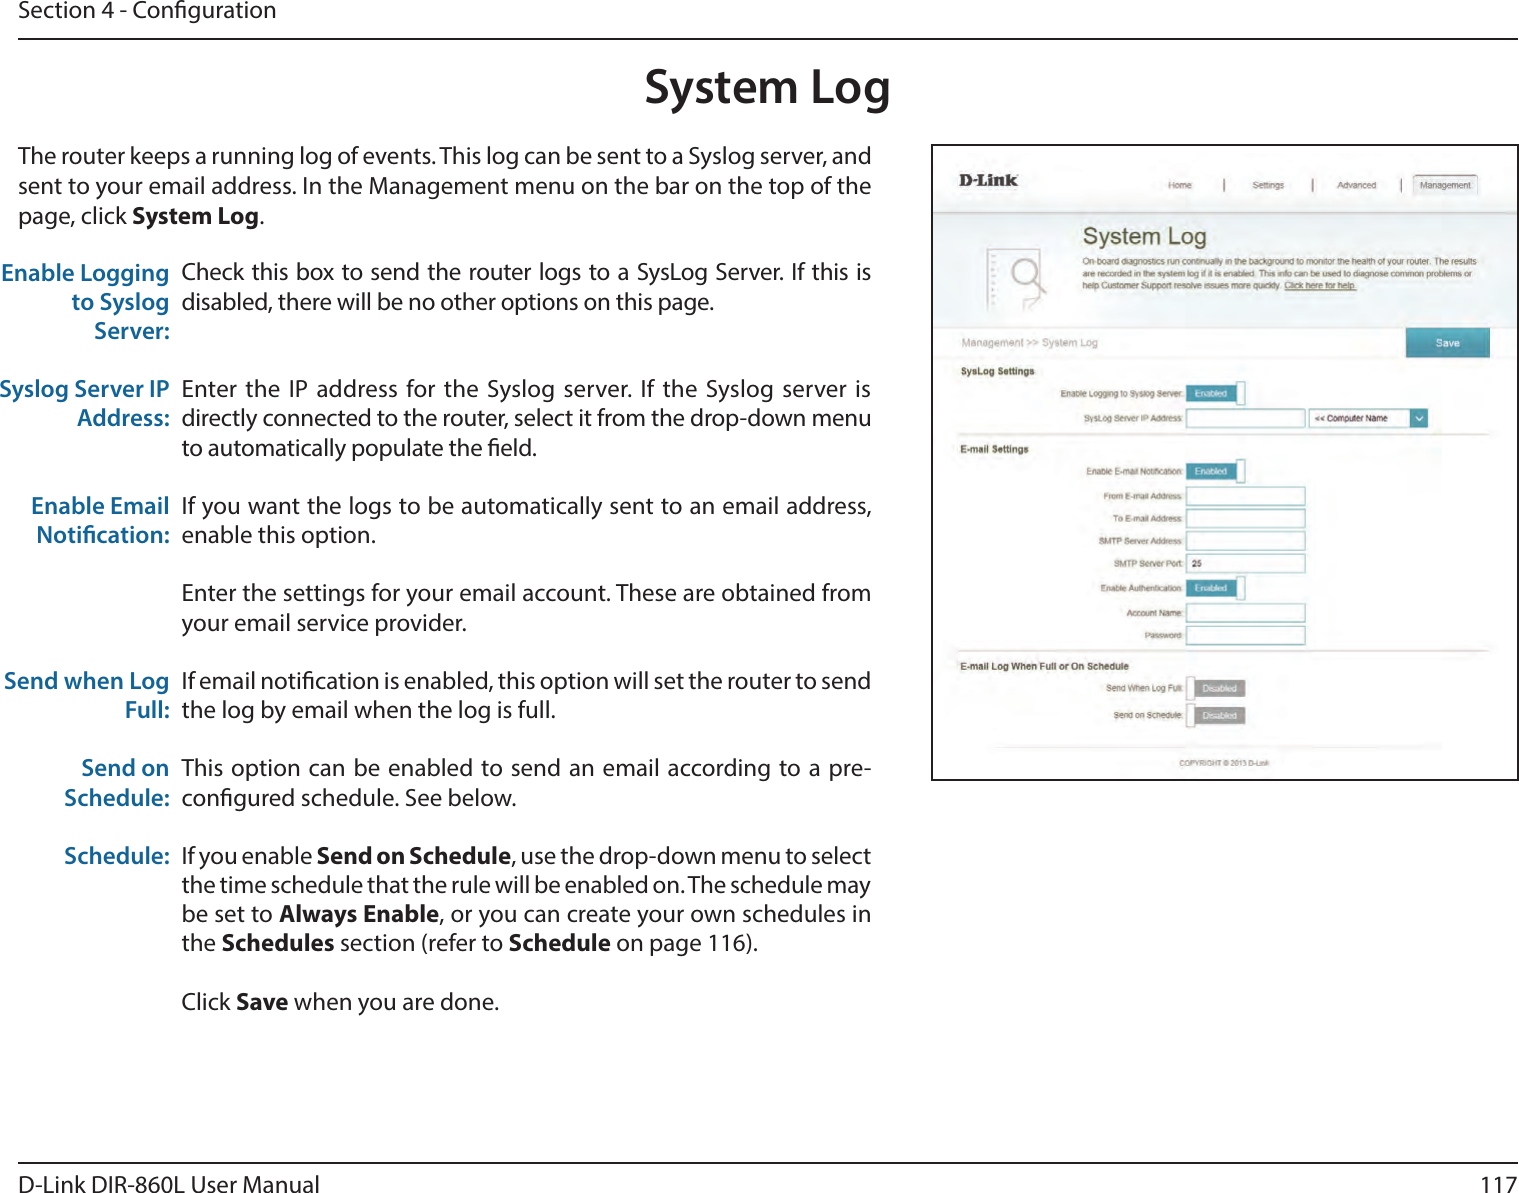 117D-Link DIR-860L User ManualSection 4 - CongurationSystem LogCheck this box to send the router logs to a SysLog Server. If this is disabled, there will be no other options on this page.Enter the IP address for the Syslog server. If the Syslog server is directly connected to the router, select it from the drop-down menu to automatically populate the eld. If you want the logs to be automatically sent to an email address, enable this option.Enter the settings for your email account. These are obtained from your email service provider.If email notication is enabled, this option will set the router to send the log by email when the log is full.This option can be enabled to send an email according to a pre-congured schedule. See below.If you enable Send on Schedule, use the drop-down menu to select the time schedule that the rule will be enabled on. The schedule may be set to Always Enable, or you can create your own schedules in the Schedules section (refer to Schedule on page 116).Click Save when you are done.Enable Logging to Syslog Server:Syslog Server IP Address:Enable Email Notication:Send when Log Full:Send on Schedule:Schedule:The router keeps a running log of events. This log can be sent to a Syslog server, and sent to your email address. In the Management menu on the bar on the top of the page, click System Log. 